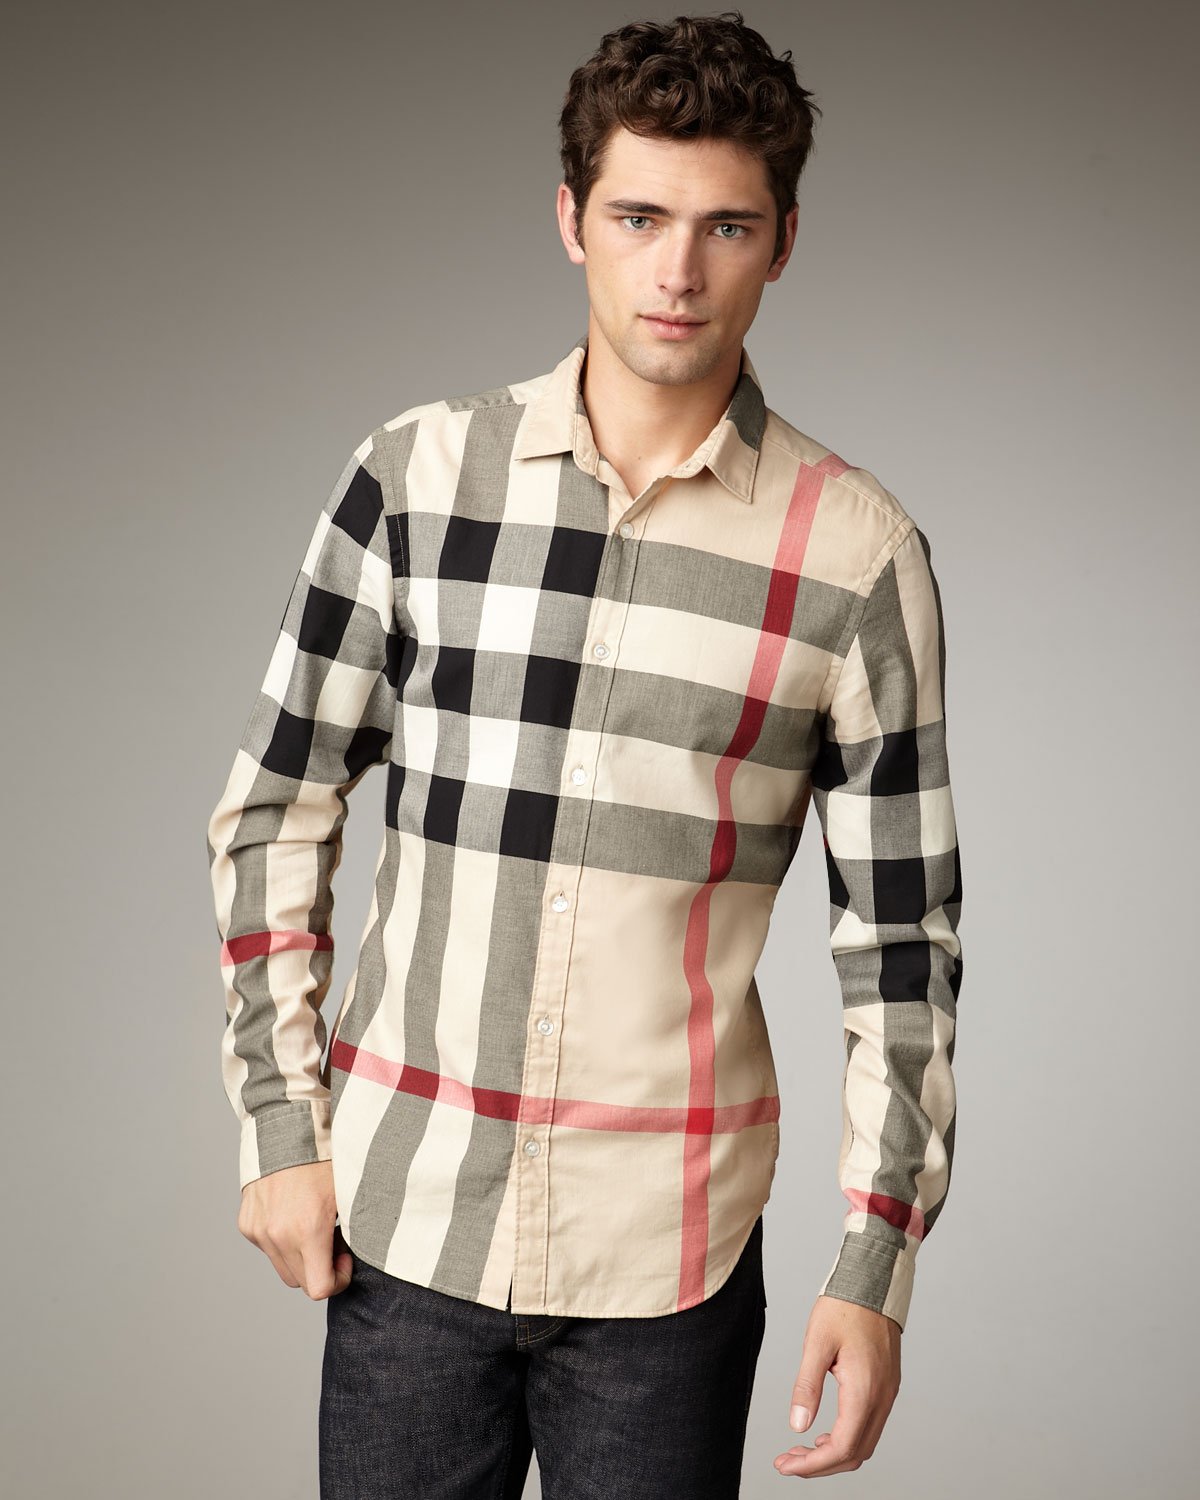 Lyst - Burberry brit Quad-check Woven Shirt in Natural for Men